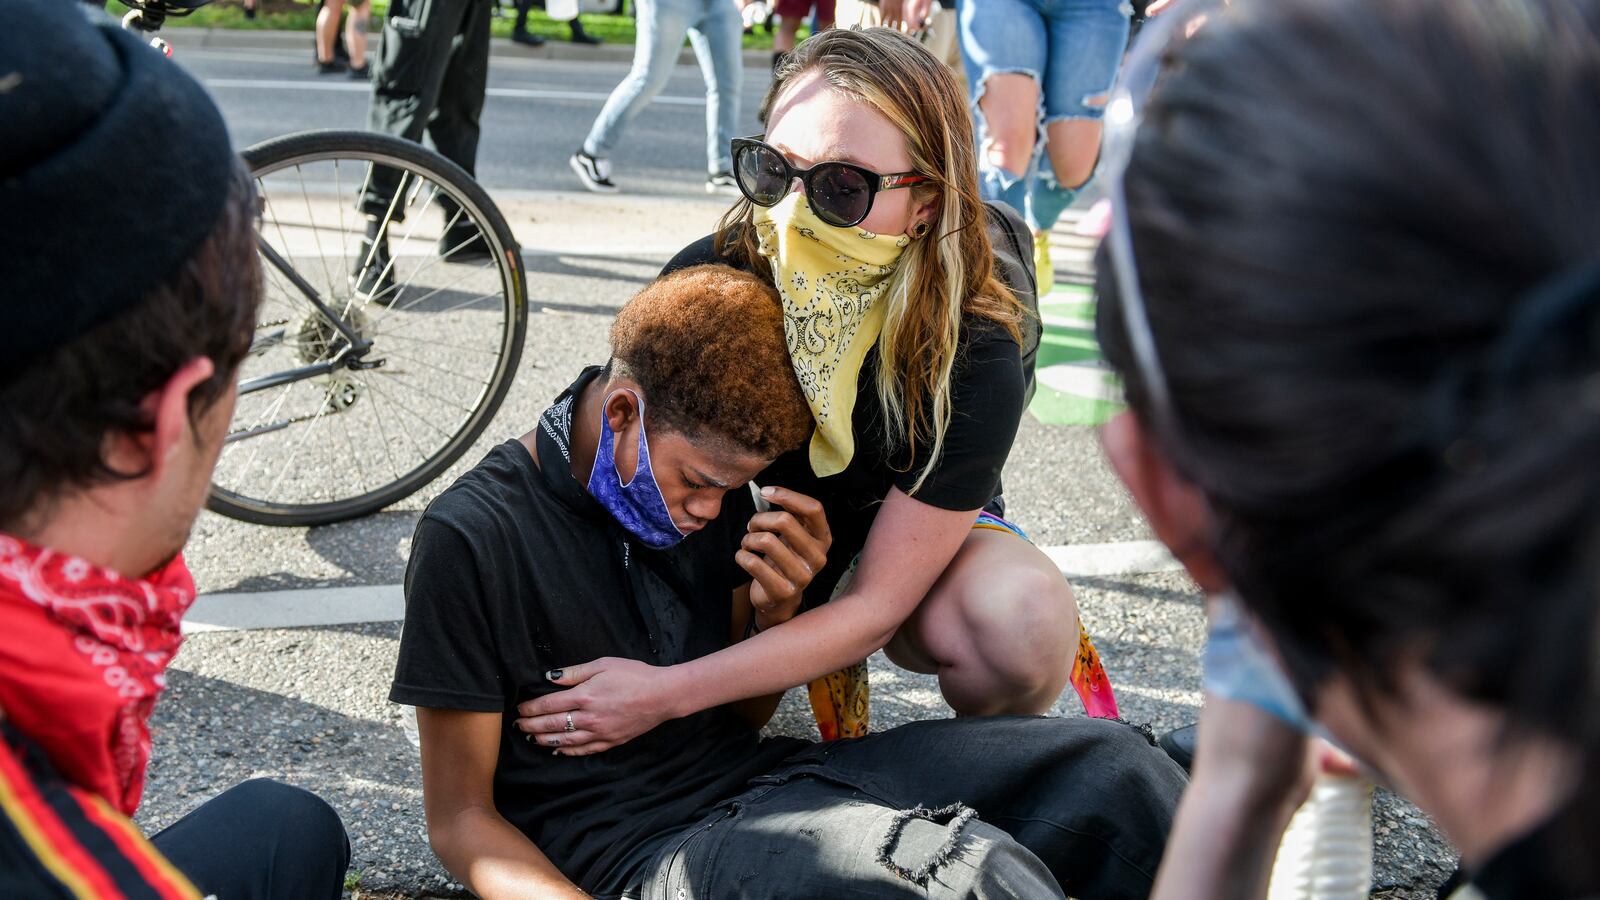 A woman wearing a yellow bandana and black shirt consoles a young man wearing a black shirt and jeans who is under duress. There are two people in the foreground, one with a red bandana.